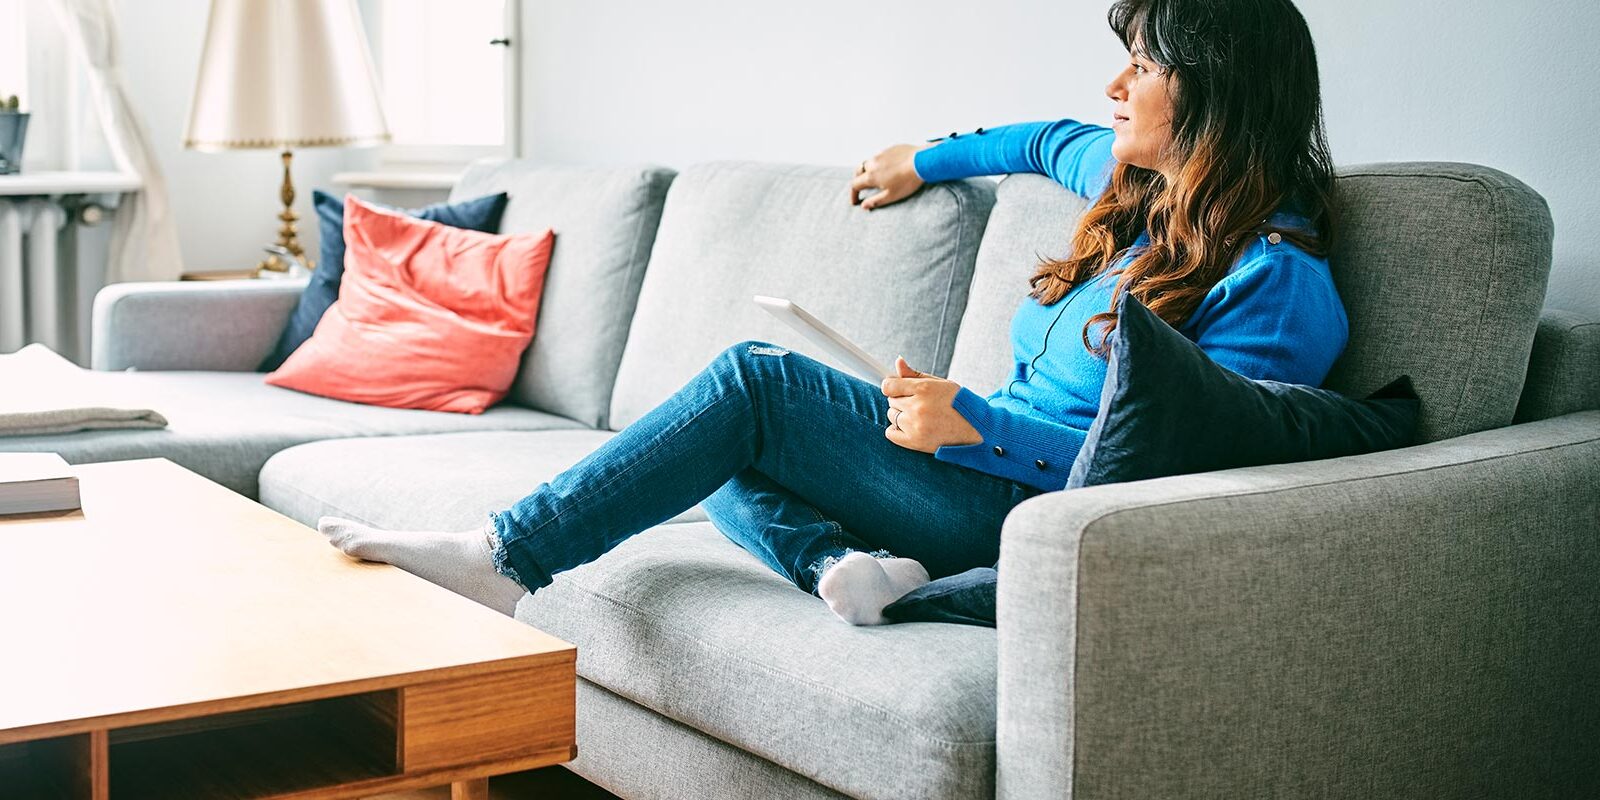 How Your Living Space Affects Your Mental Health, According to 7 Experts